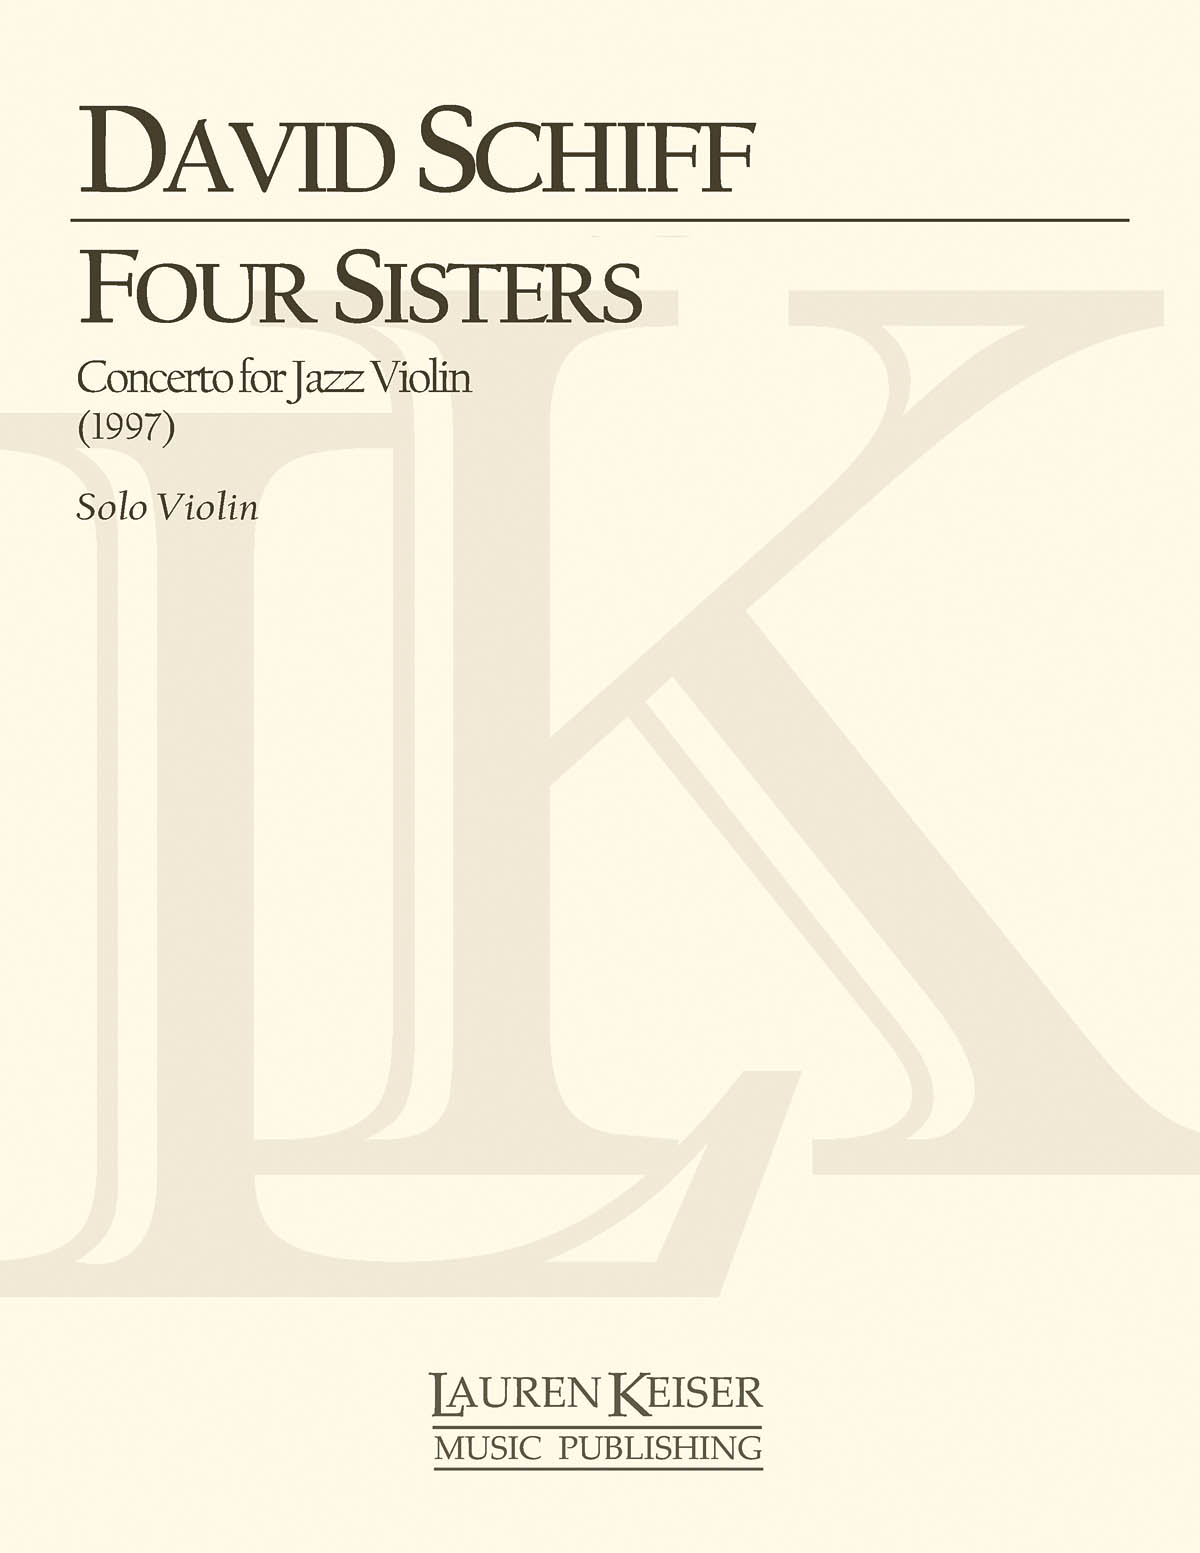 Four Sisters: Concerto for Jazz Violin: Orchestra and Solo: Part